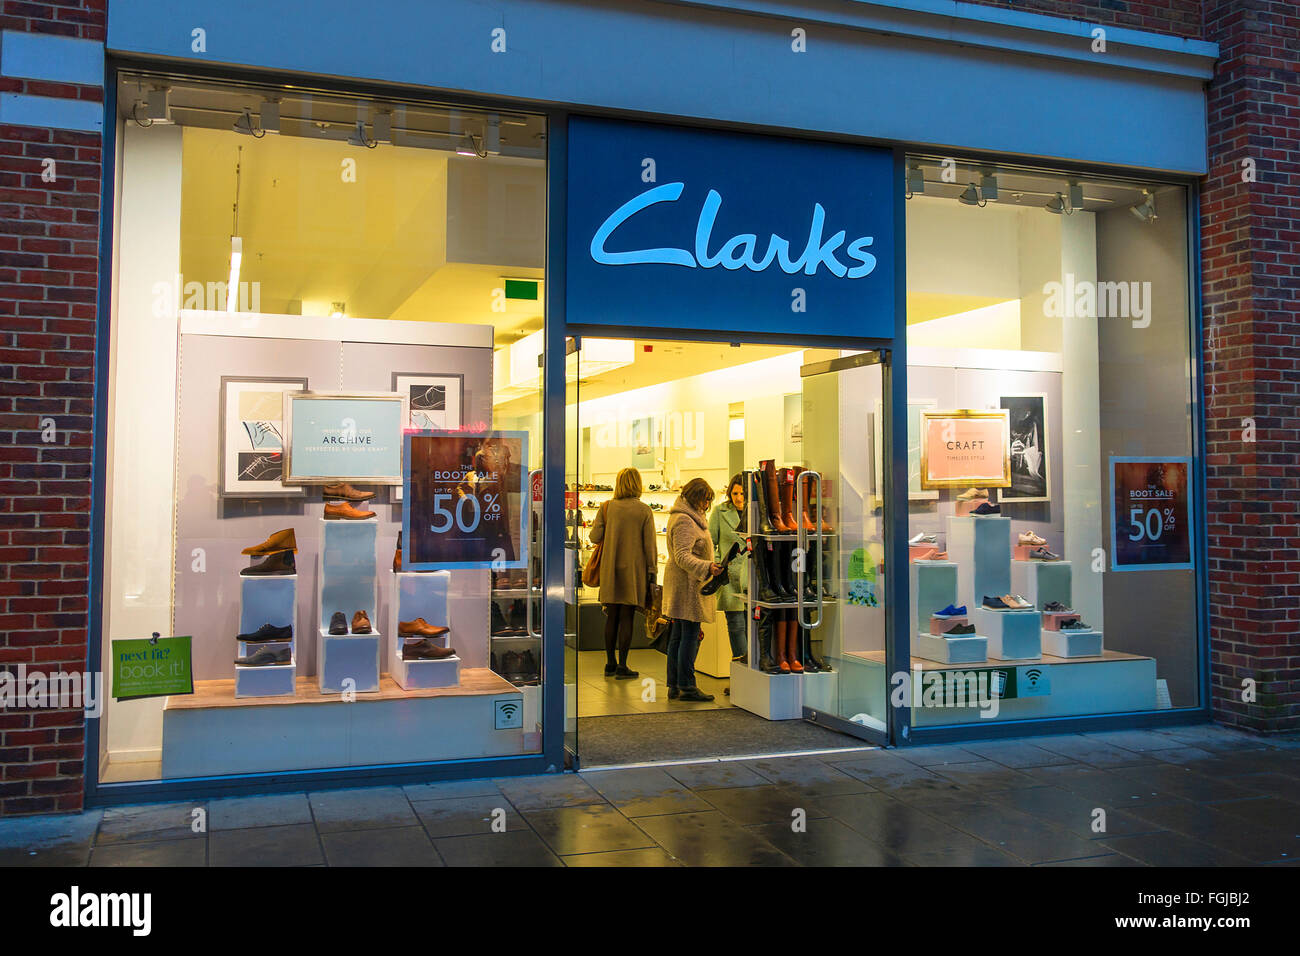 Clarks Chaussures Bottes Grand Magasin Magasin de chaussures Banque D'Images